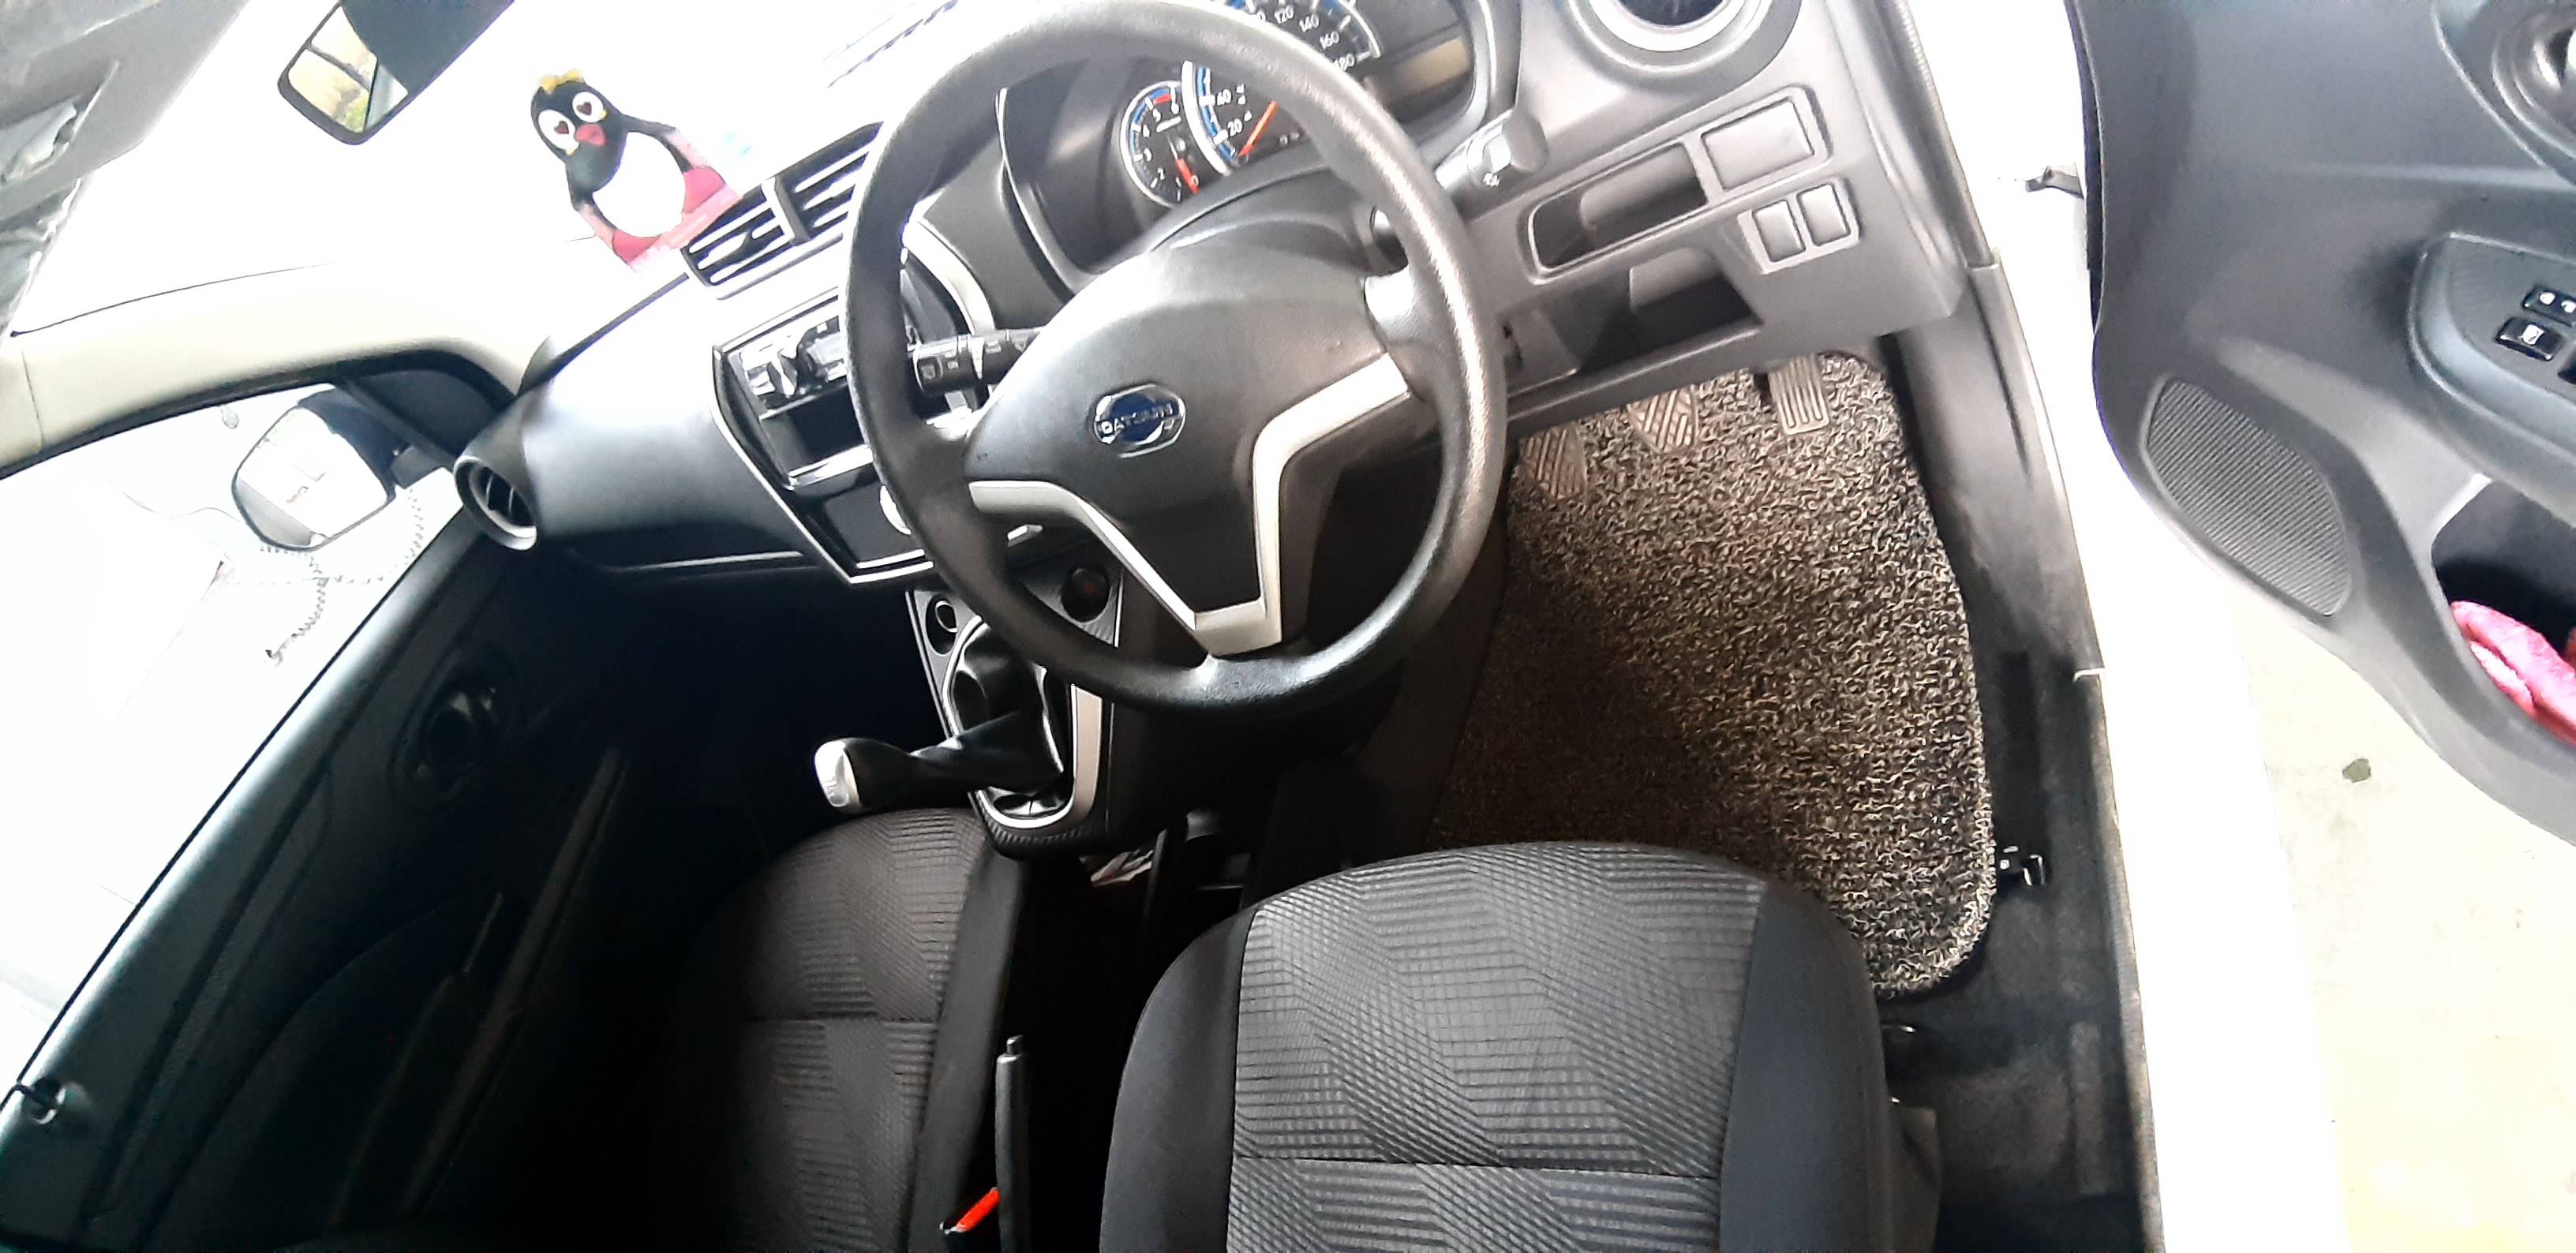 Used 2019 Datsun GO A MT A MT for sale